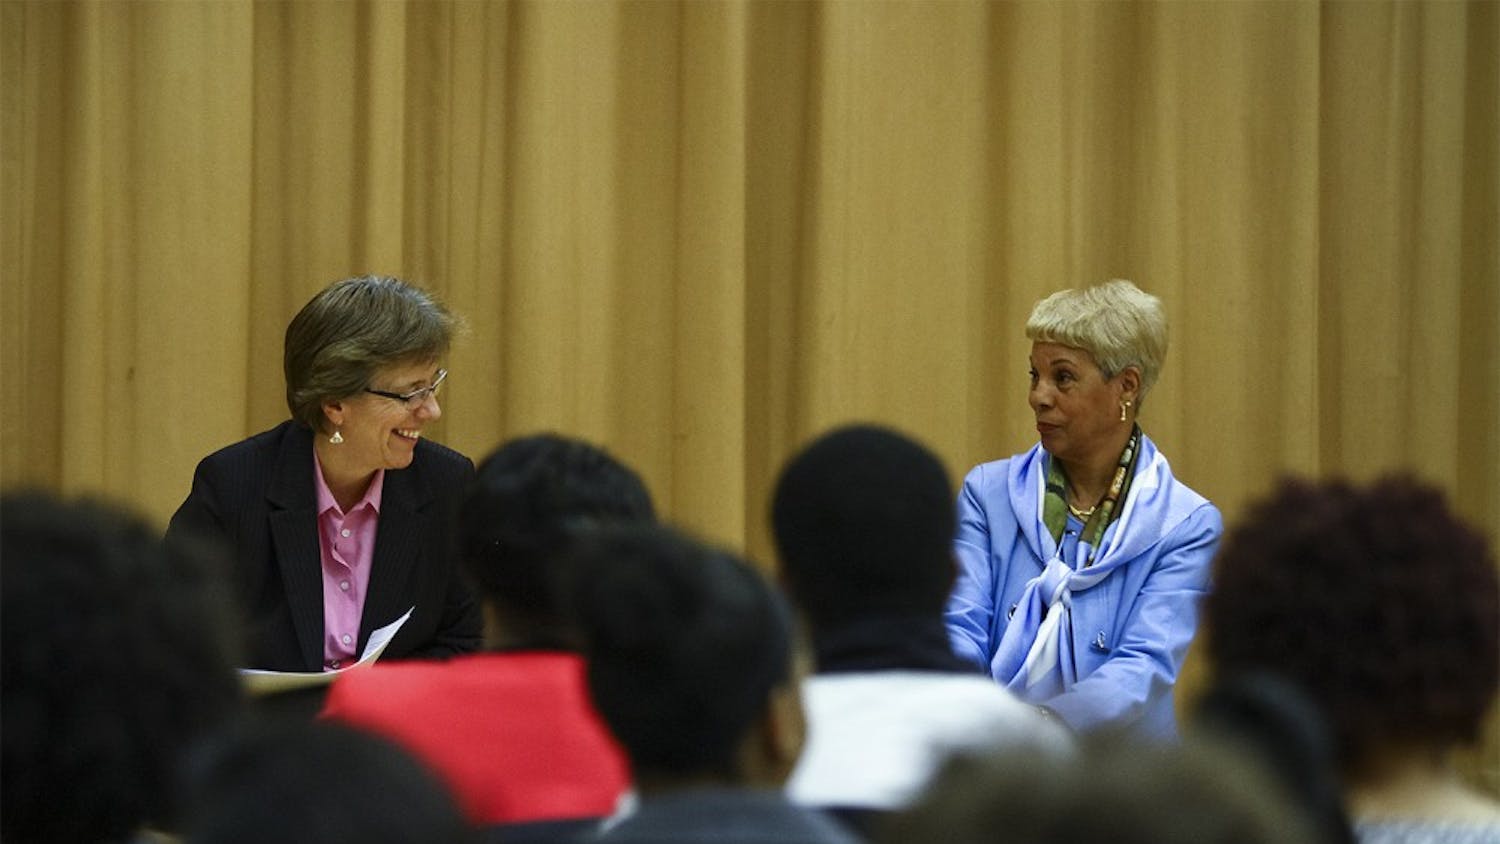 Carrboro mayor Lydia LaBelle and Edith Parker, a Carolina alumnus, speak on a panel of minority women leaders in the Stone Center on Wednesday evening.